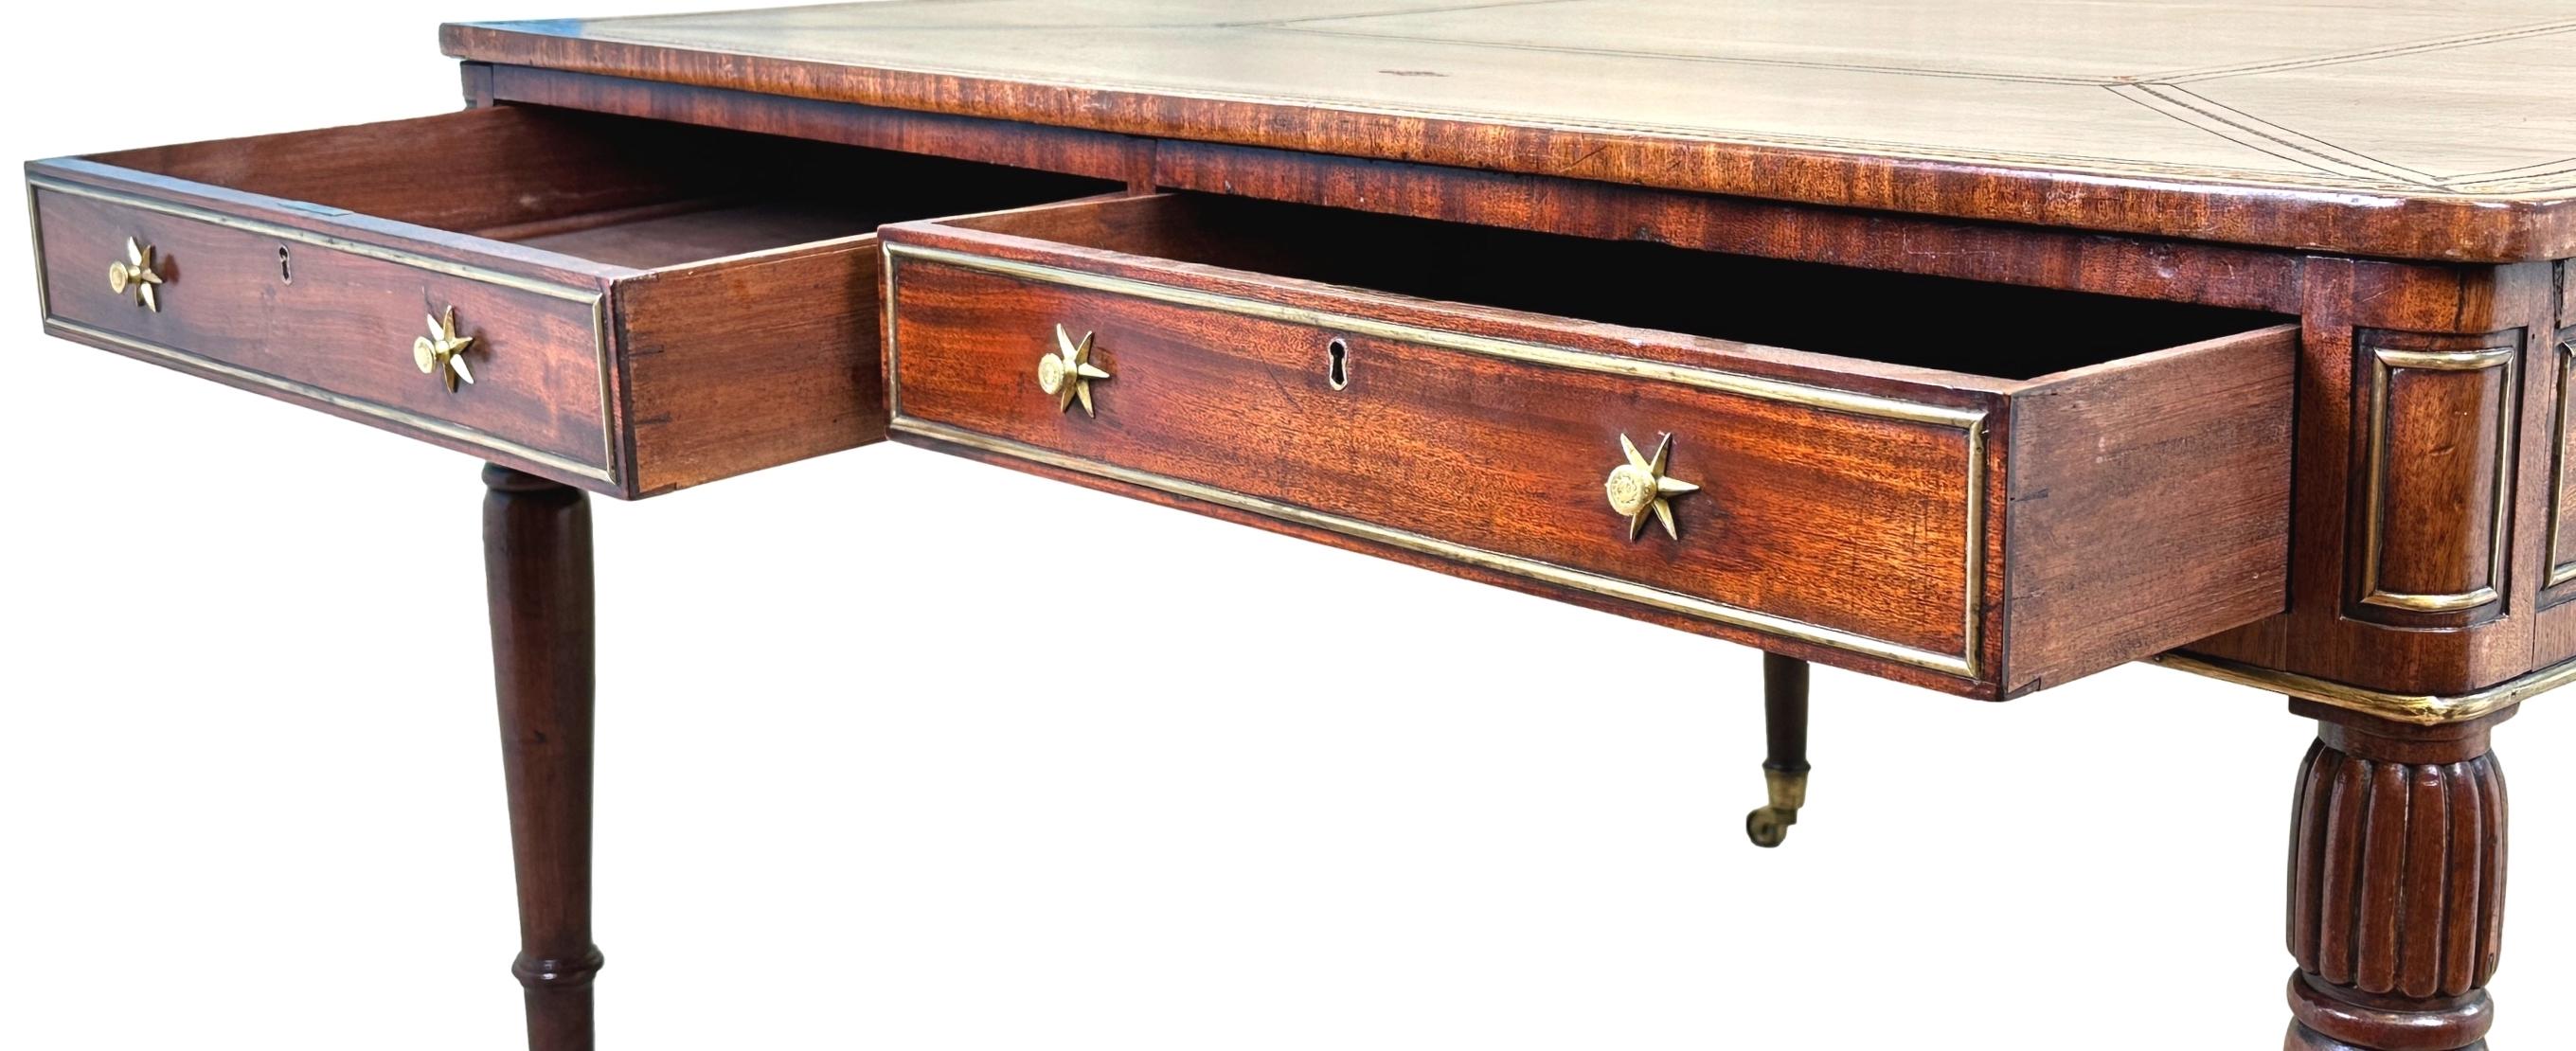 An Exceptional Quality Regency Period Mahogany And Brass, Square, Partners Writing Table, Having Attractive Gilt Tooled Leather Top With Crossbanded Edge, Over Four Drawers And Four False Drawers To Frieze, With Original Brass Moulded Decoration And